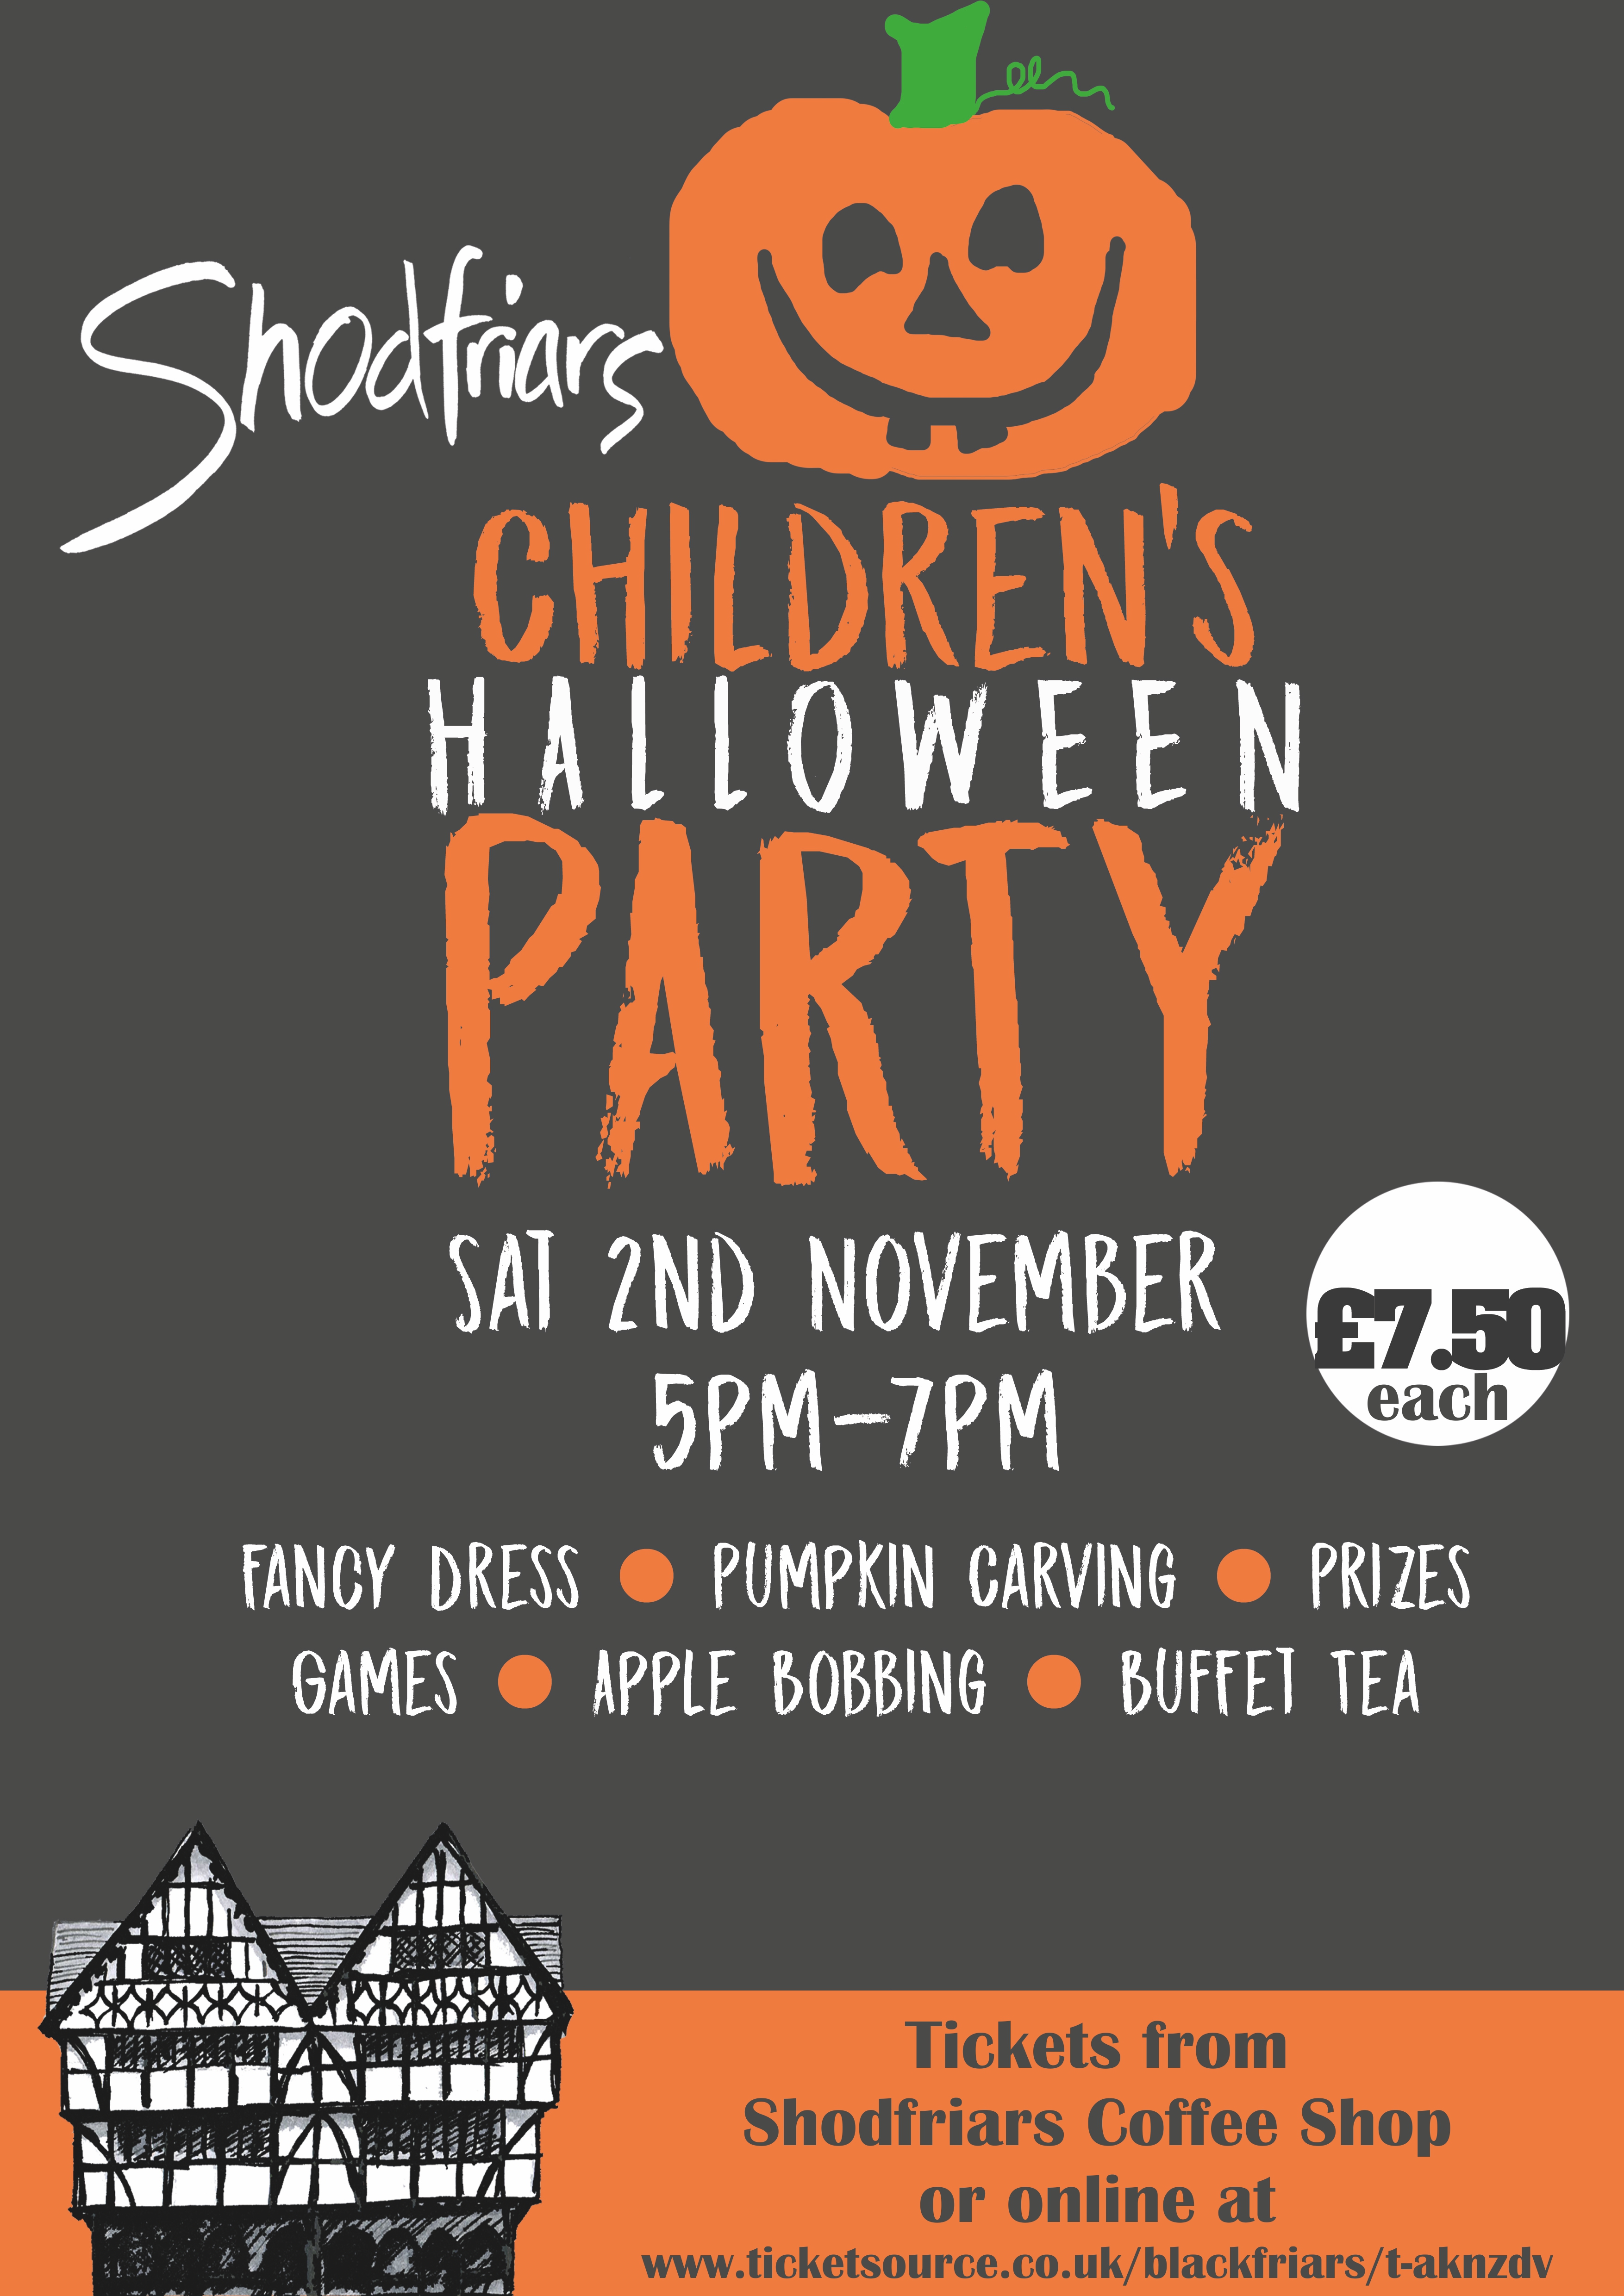 Children's Halloween Party at Shodfriars Hall 2nd November 2019